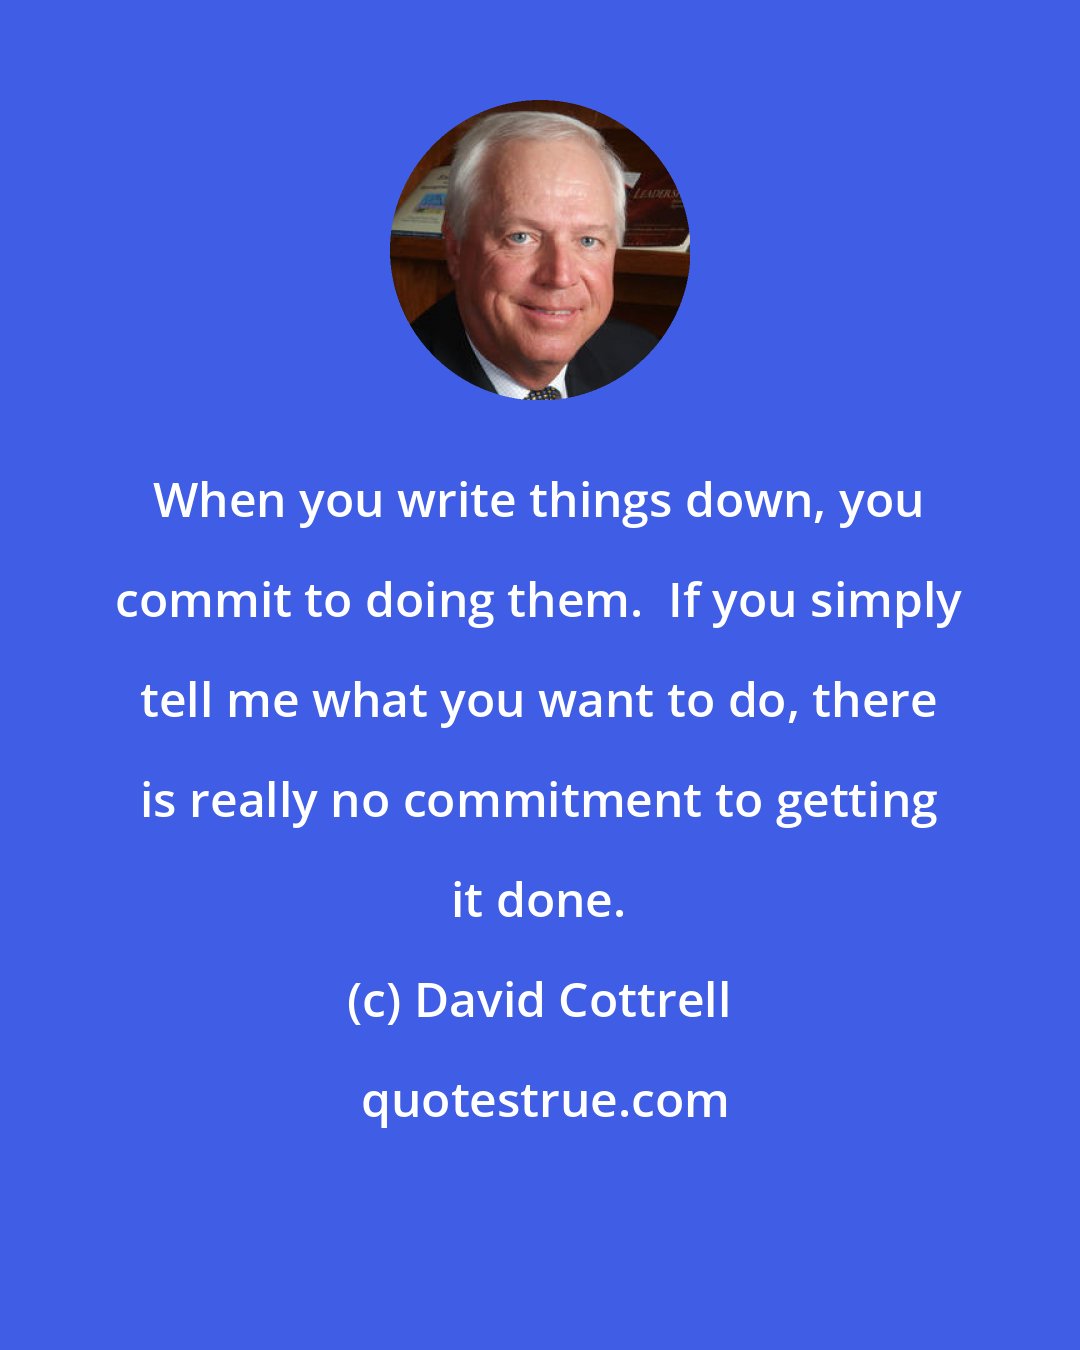 David Cottrell: When you write things down, you commit to doing them.  If you simply tell me what you want to do, there is really no commitment to getting it done.